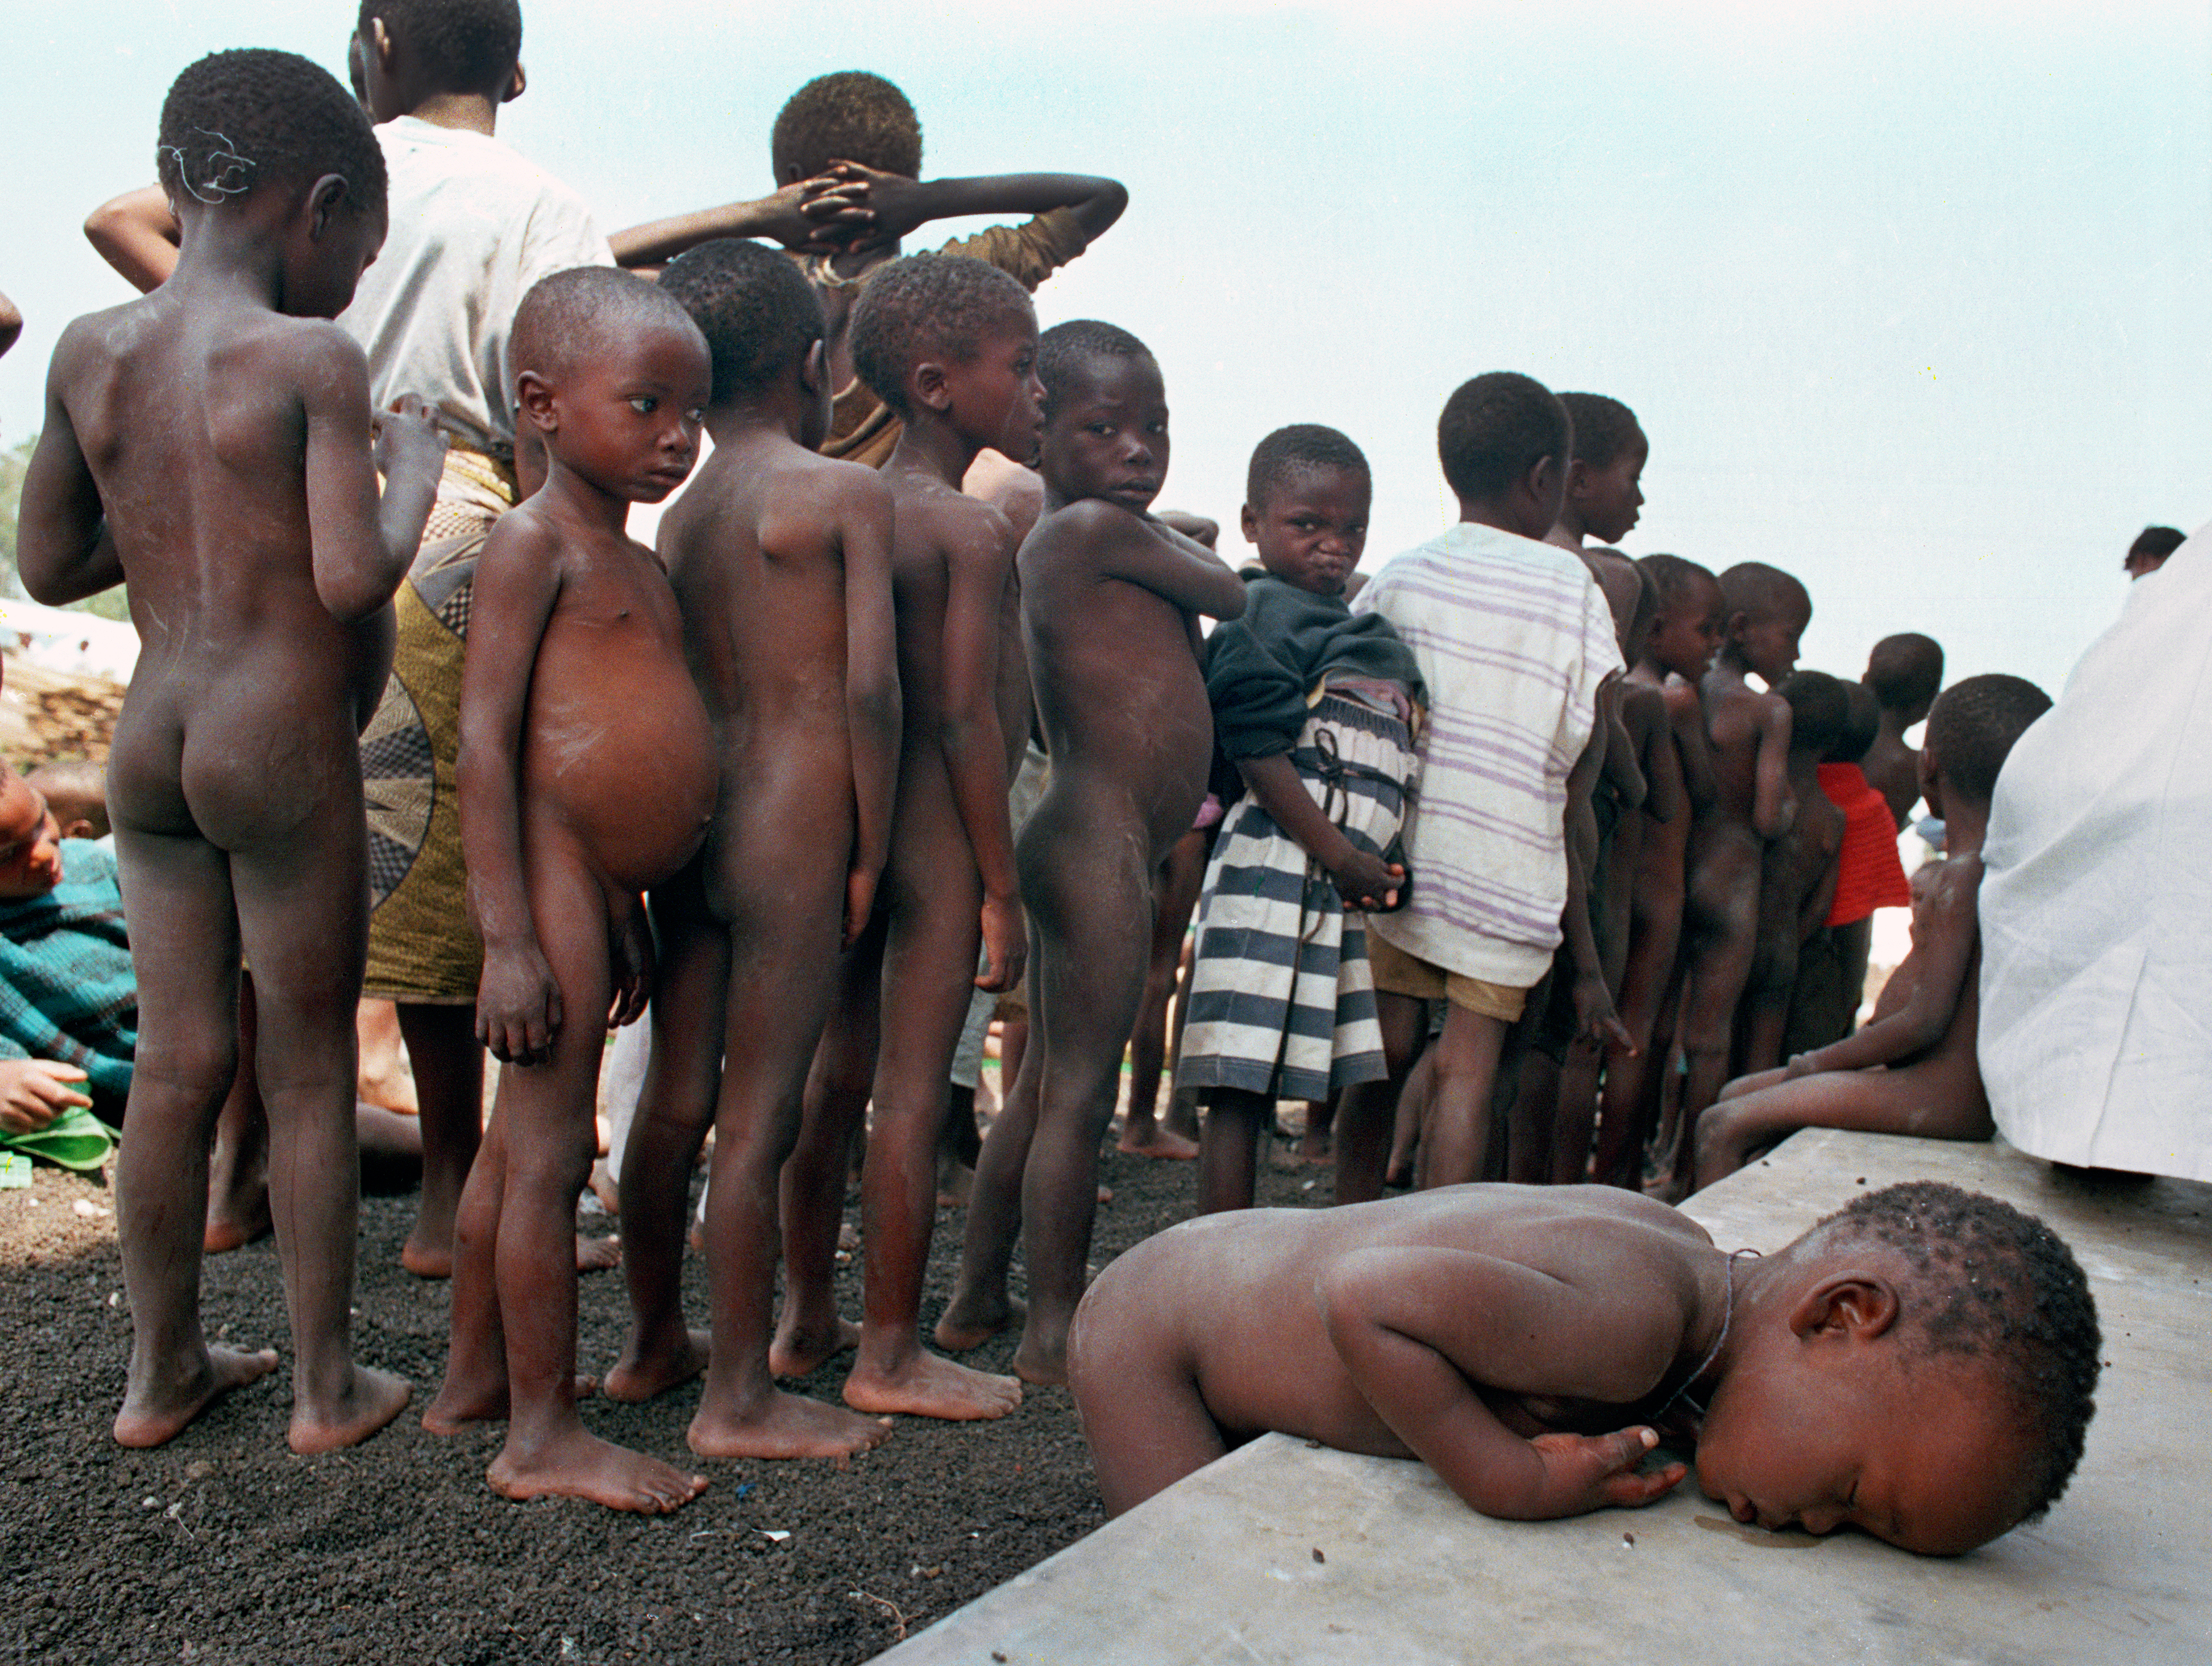 A Rwandan child, too weak from malnutrition to stand in line for vaccination, rests his head on a ledge at a crowded refugee camp for orphaned children in Ndosho, Zaire, July 28, 1994. (AP Photo/Jacqueline Arzt Larma)